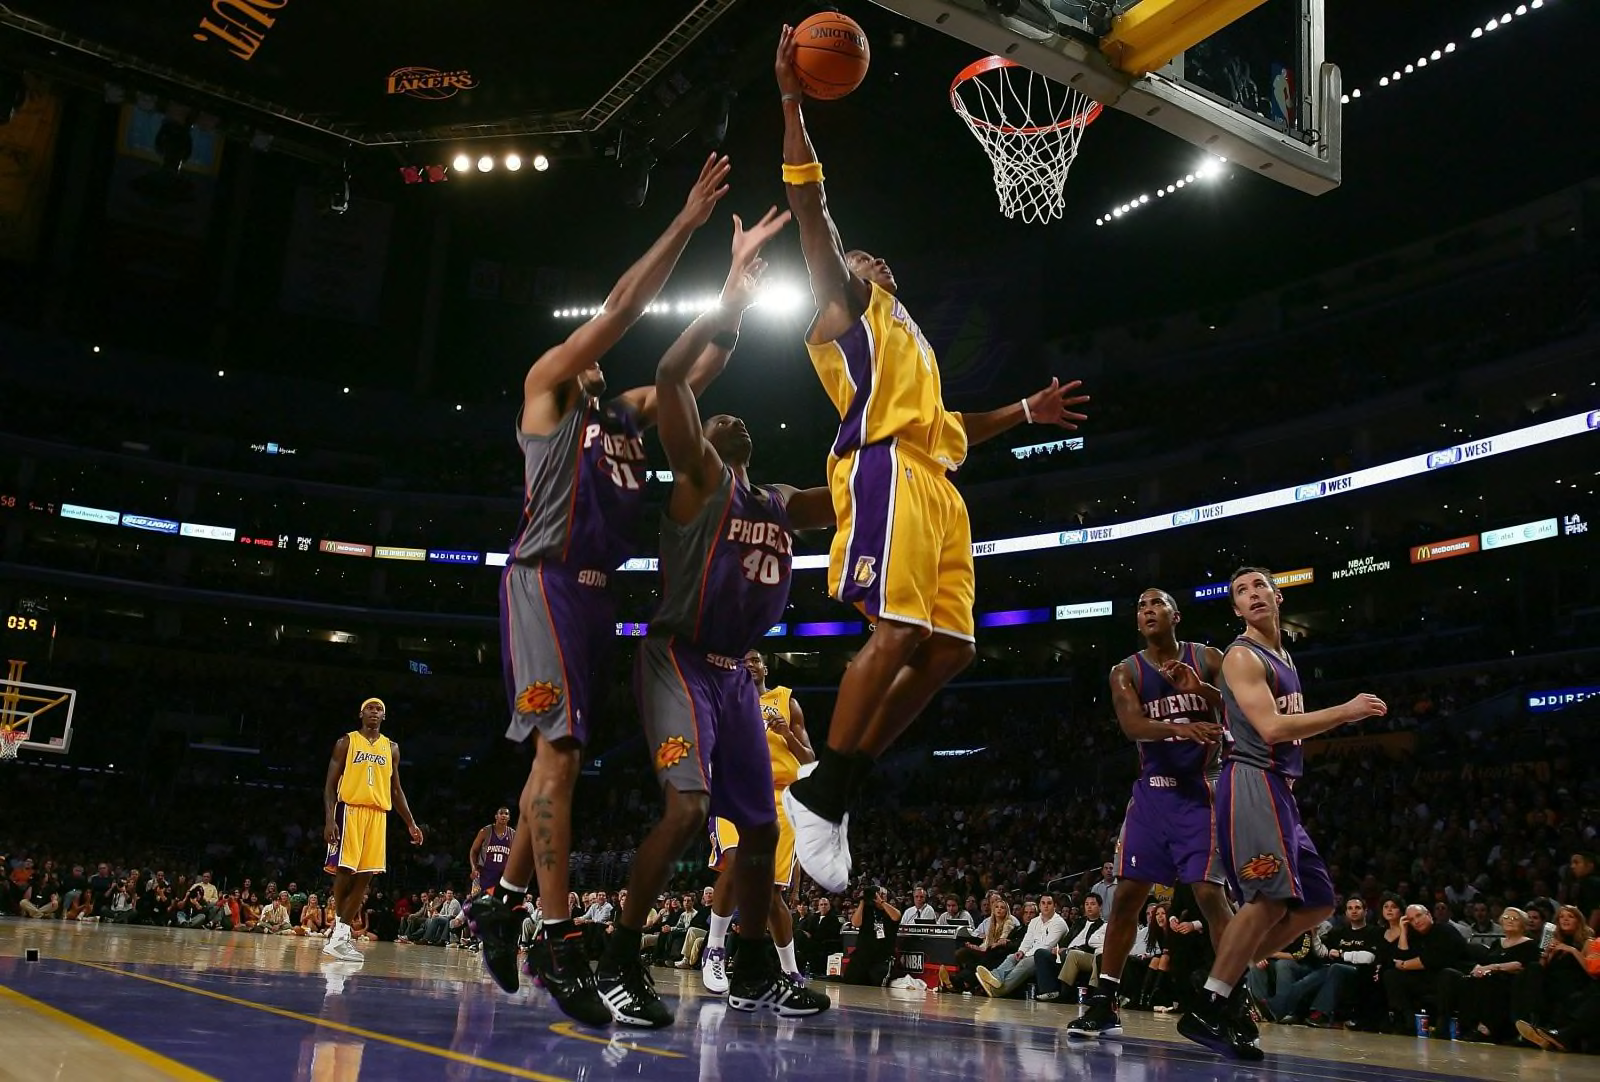 Los Angeles Lakers' guard Kobe Bryant (#8) passes around Phoenix Suns'  guard Raja Bell in Game 3 of their first-round best-of-seven Western  Conference series during the 2006 NBA Playoffs April 28, 2006